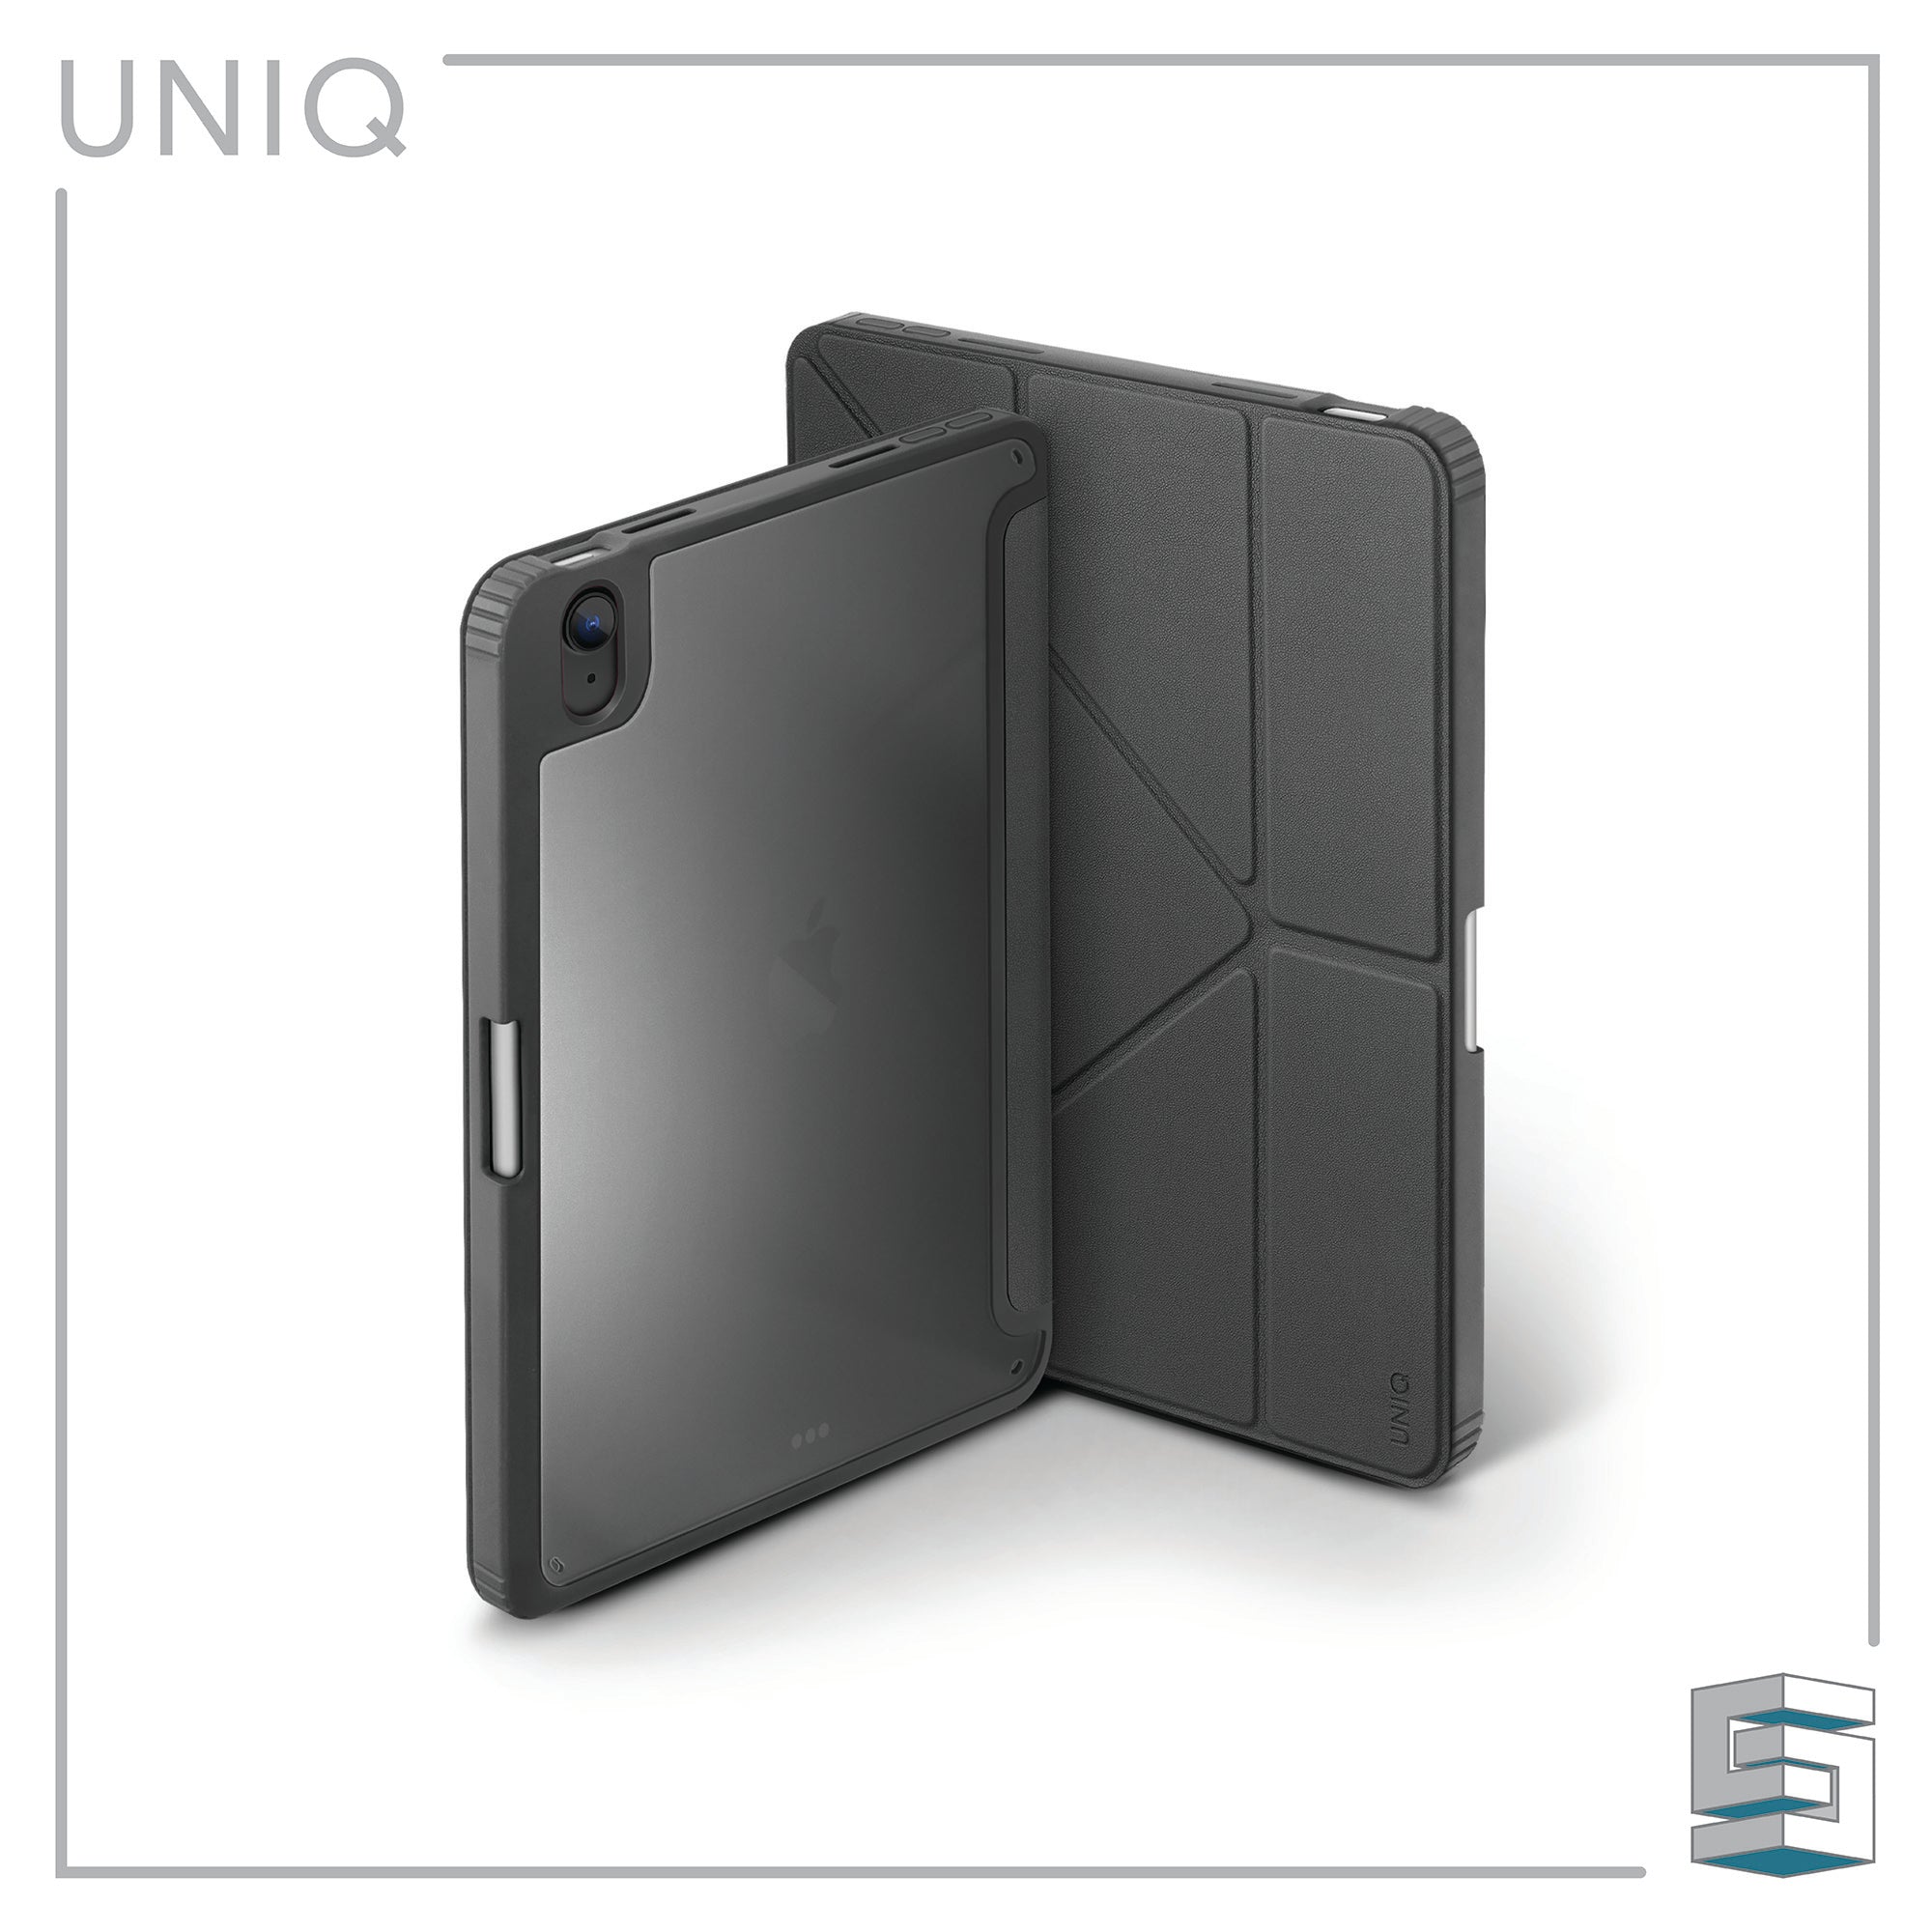 Casing for Apple iPad Mini 6 (2021) - UNIQ Moven (antimicrobial)  freeshipping - Global Synergy Concepts